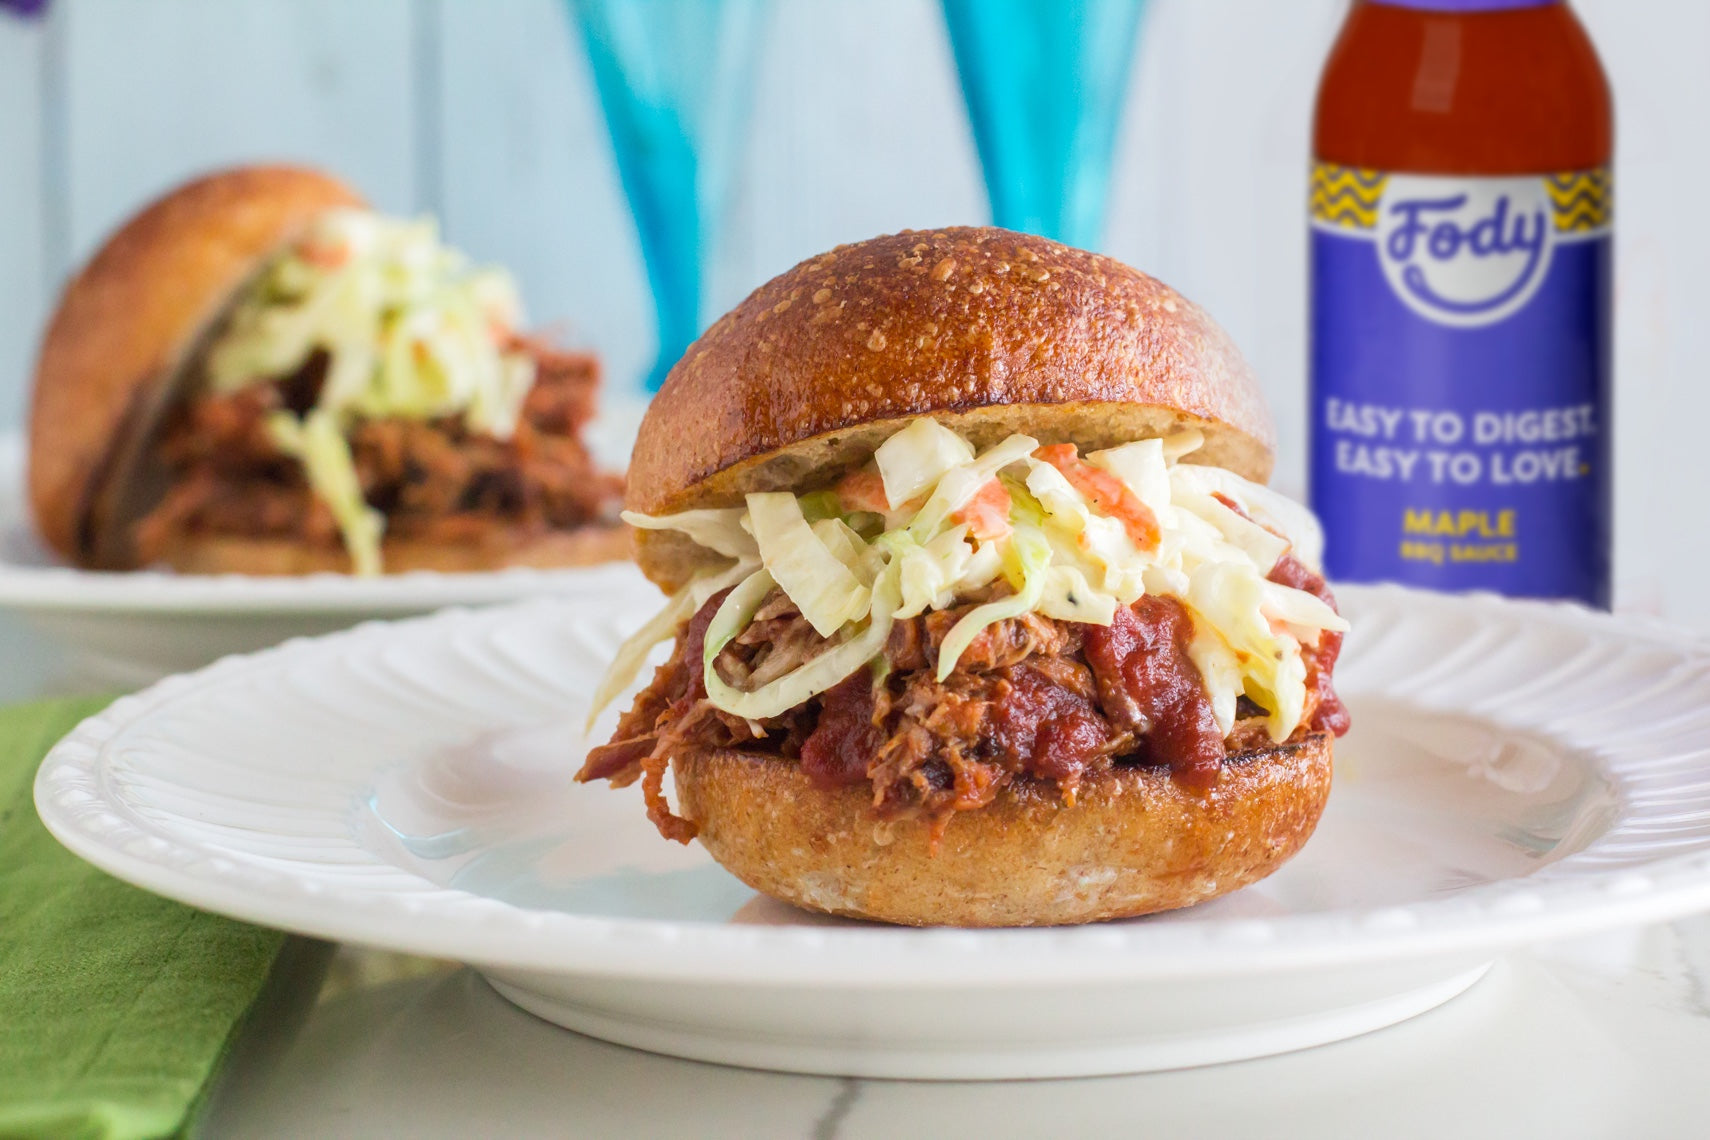 Fody's Easy Pulled Pork Sandwiches